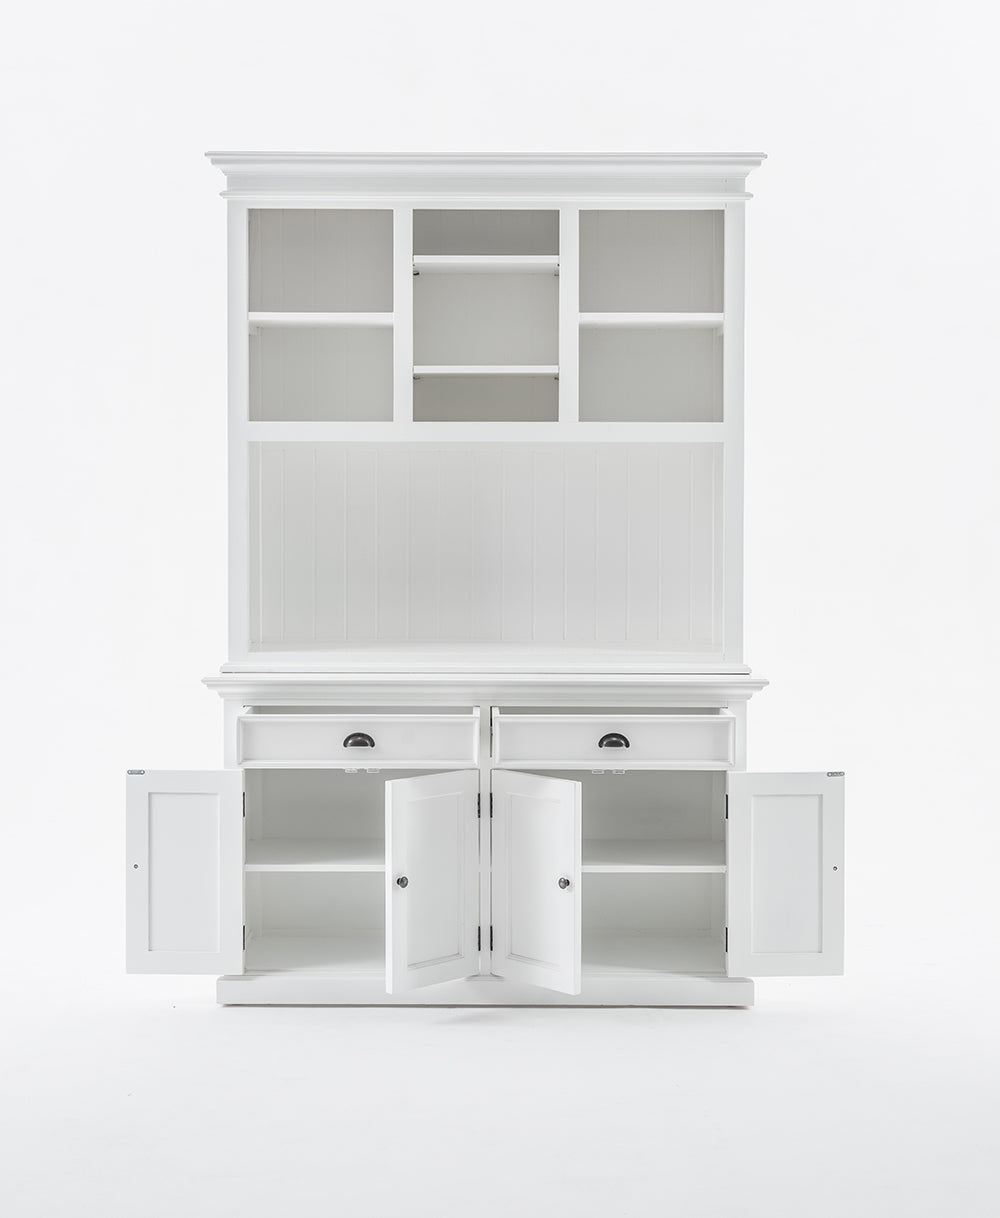 Halifax Buffet Hutch Unit with 2 Adjustable Shelves